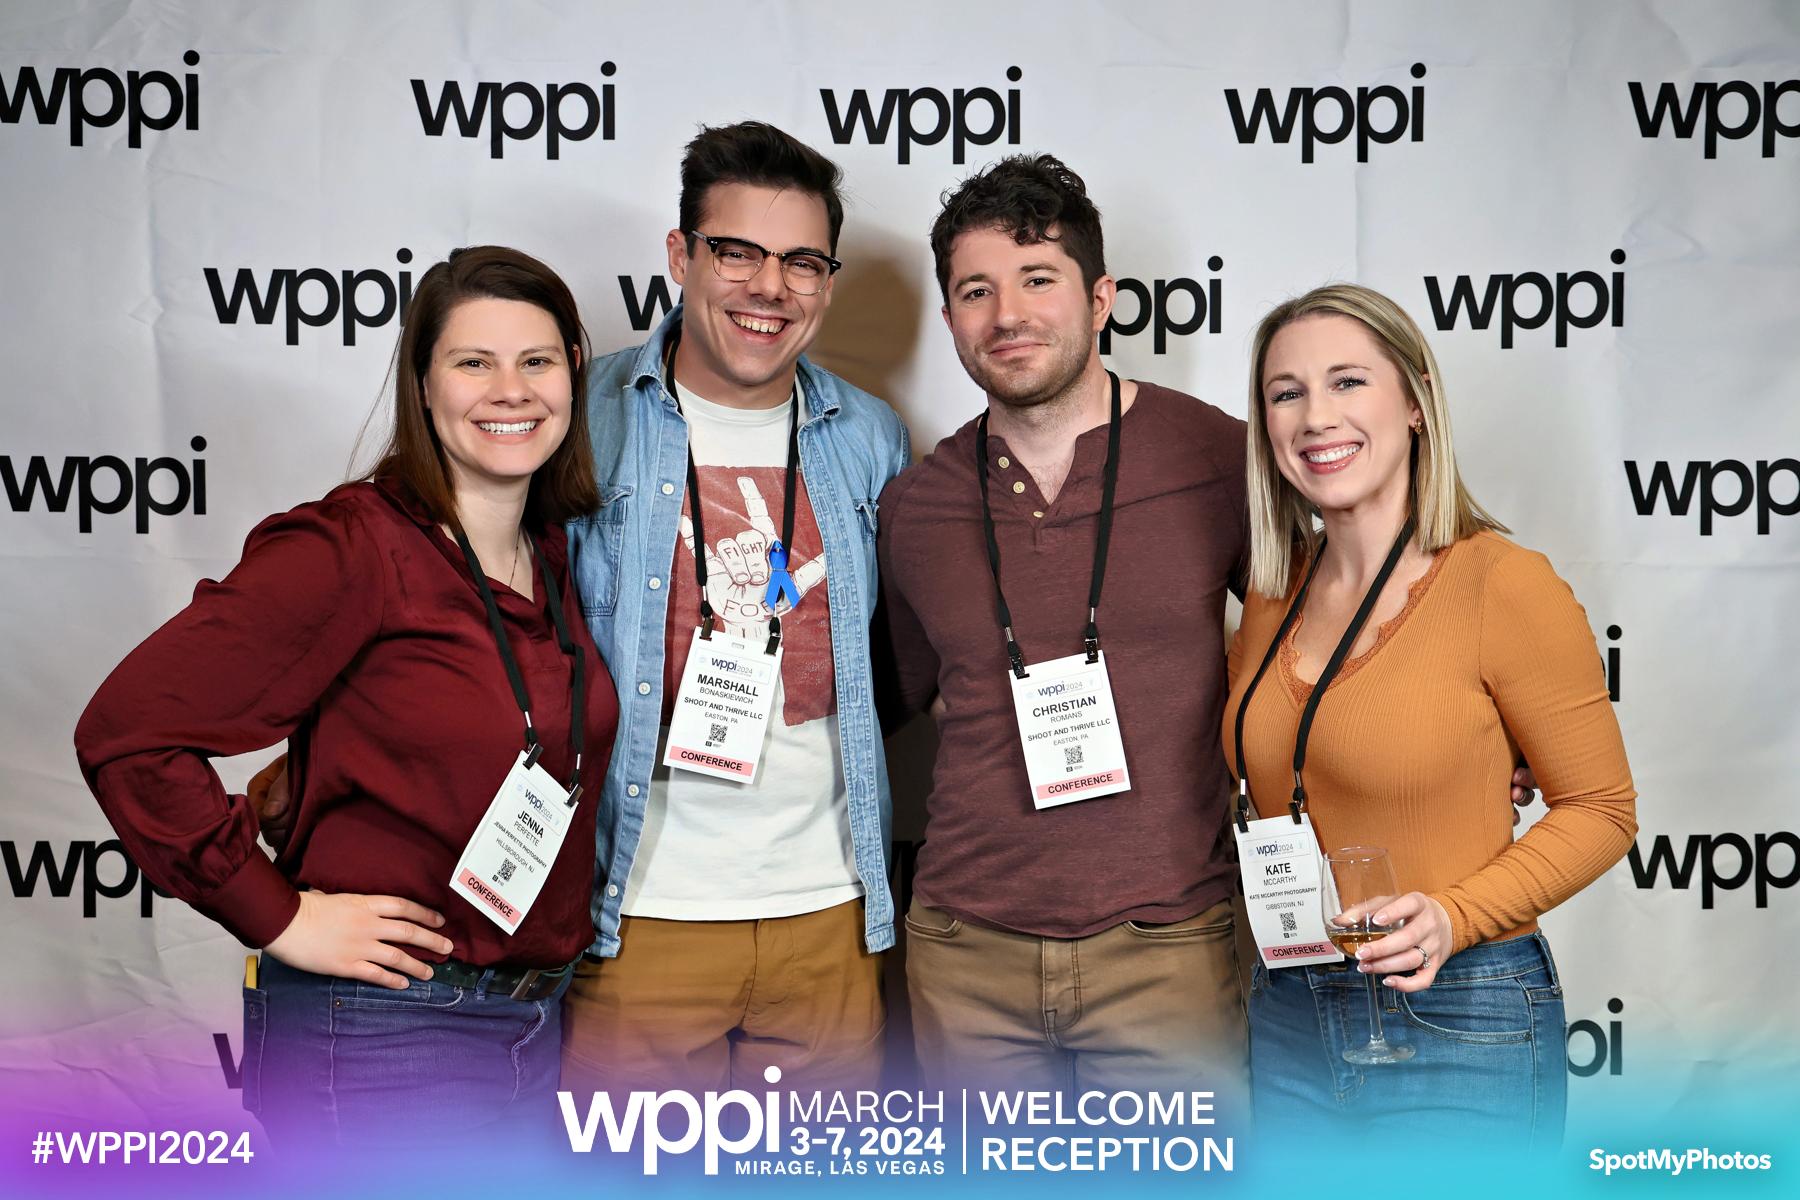 Shoot and Thrive team at WPPI 2024